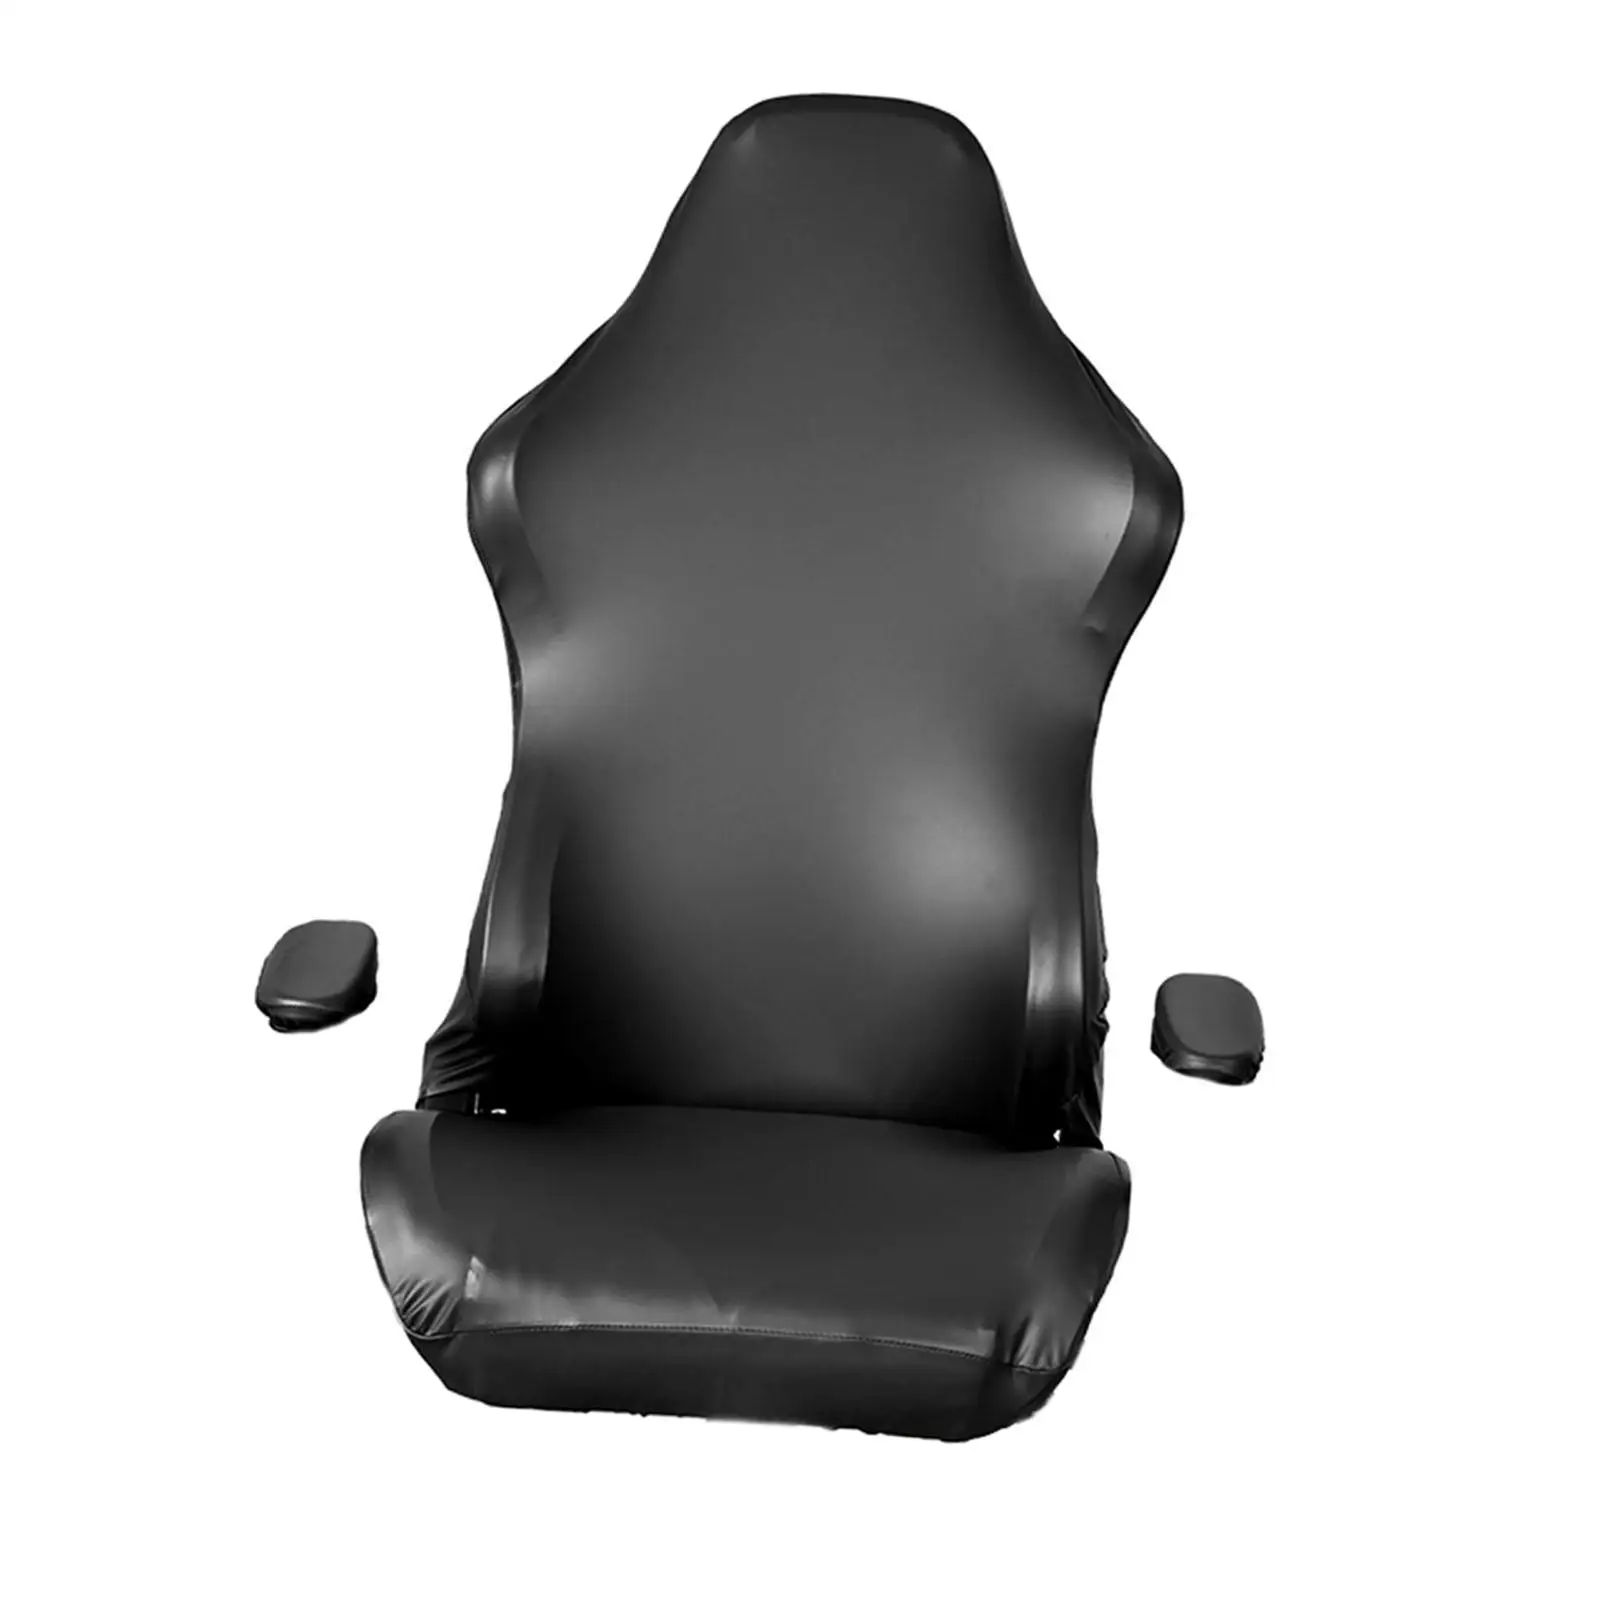 Gaming Chair Slipcovers Removable Polyester Arm Rest Cover for Dinning Chair